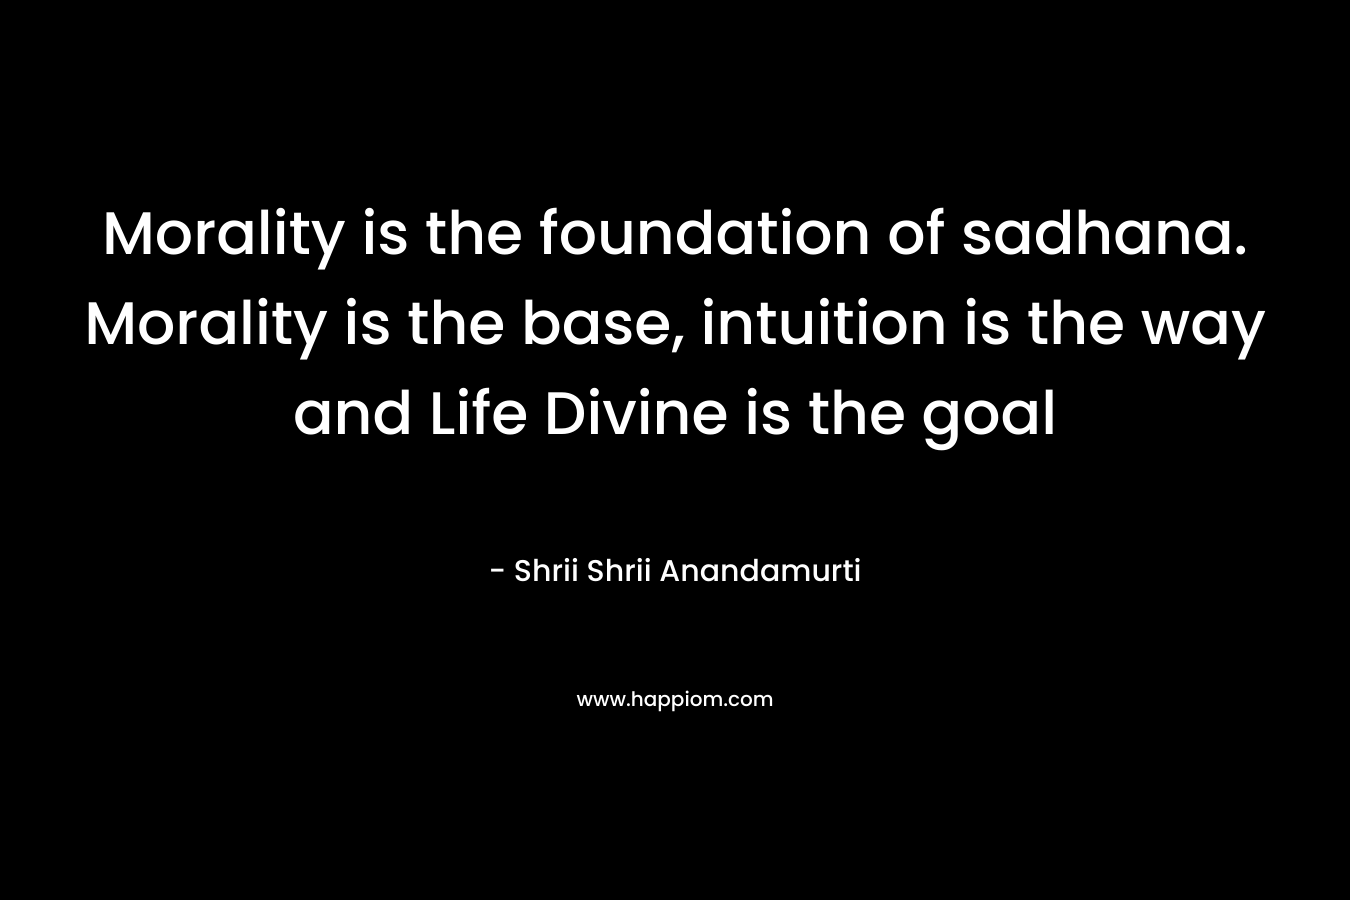 Morality is the foundation of sadhana. Morality is the base, intuition is the way and Life Divine is the goal